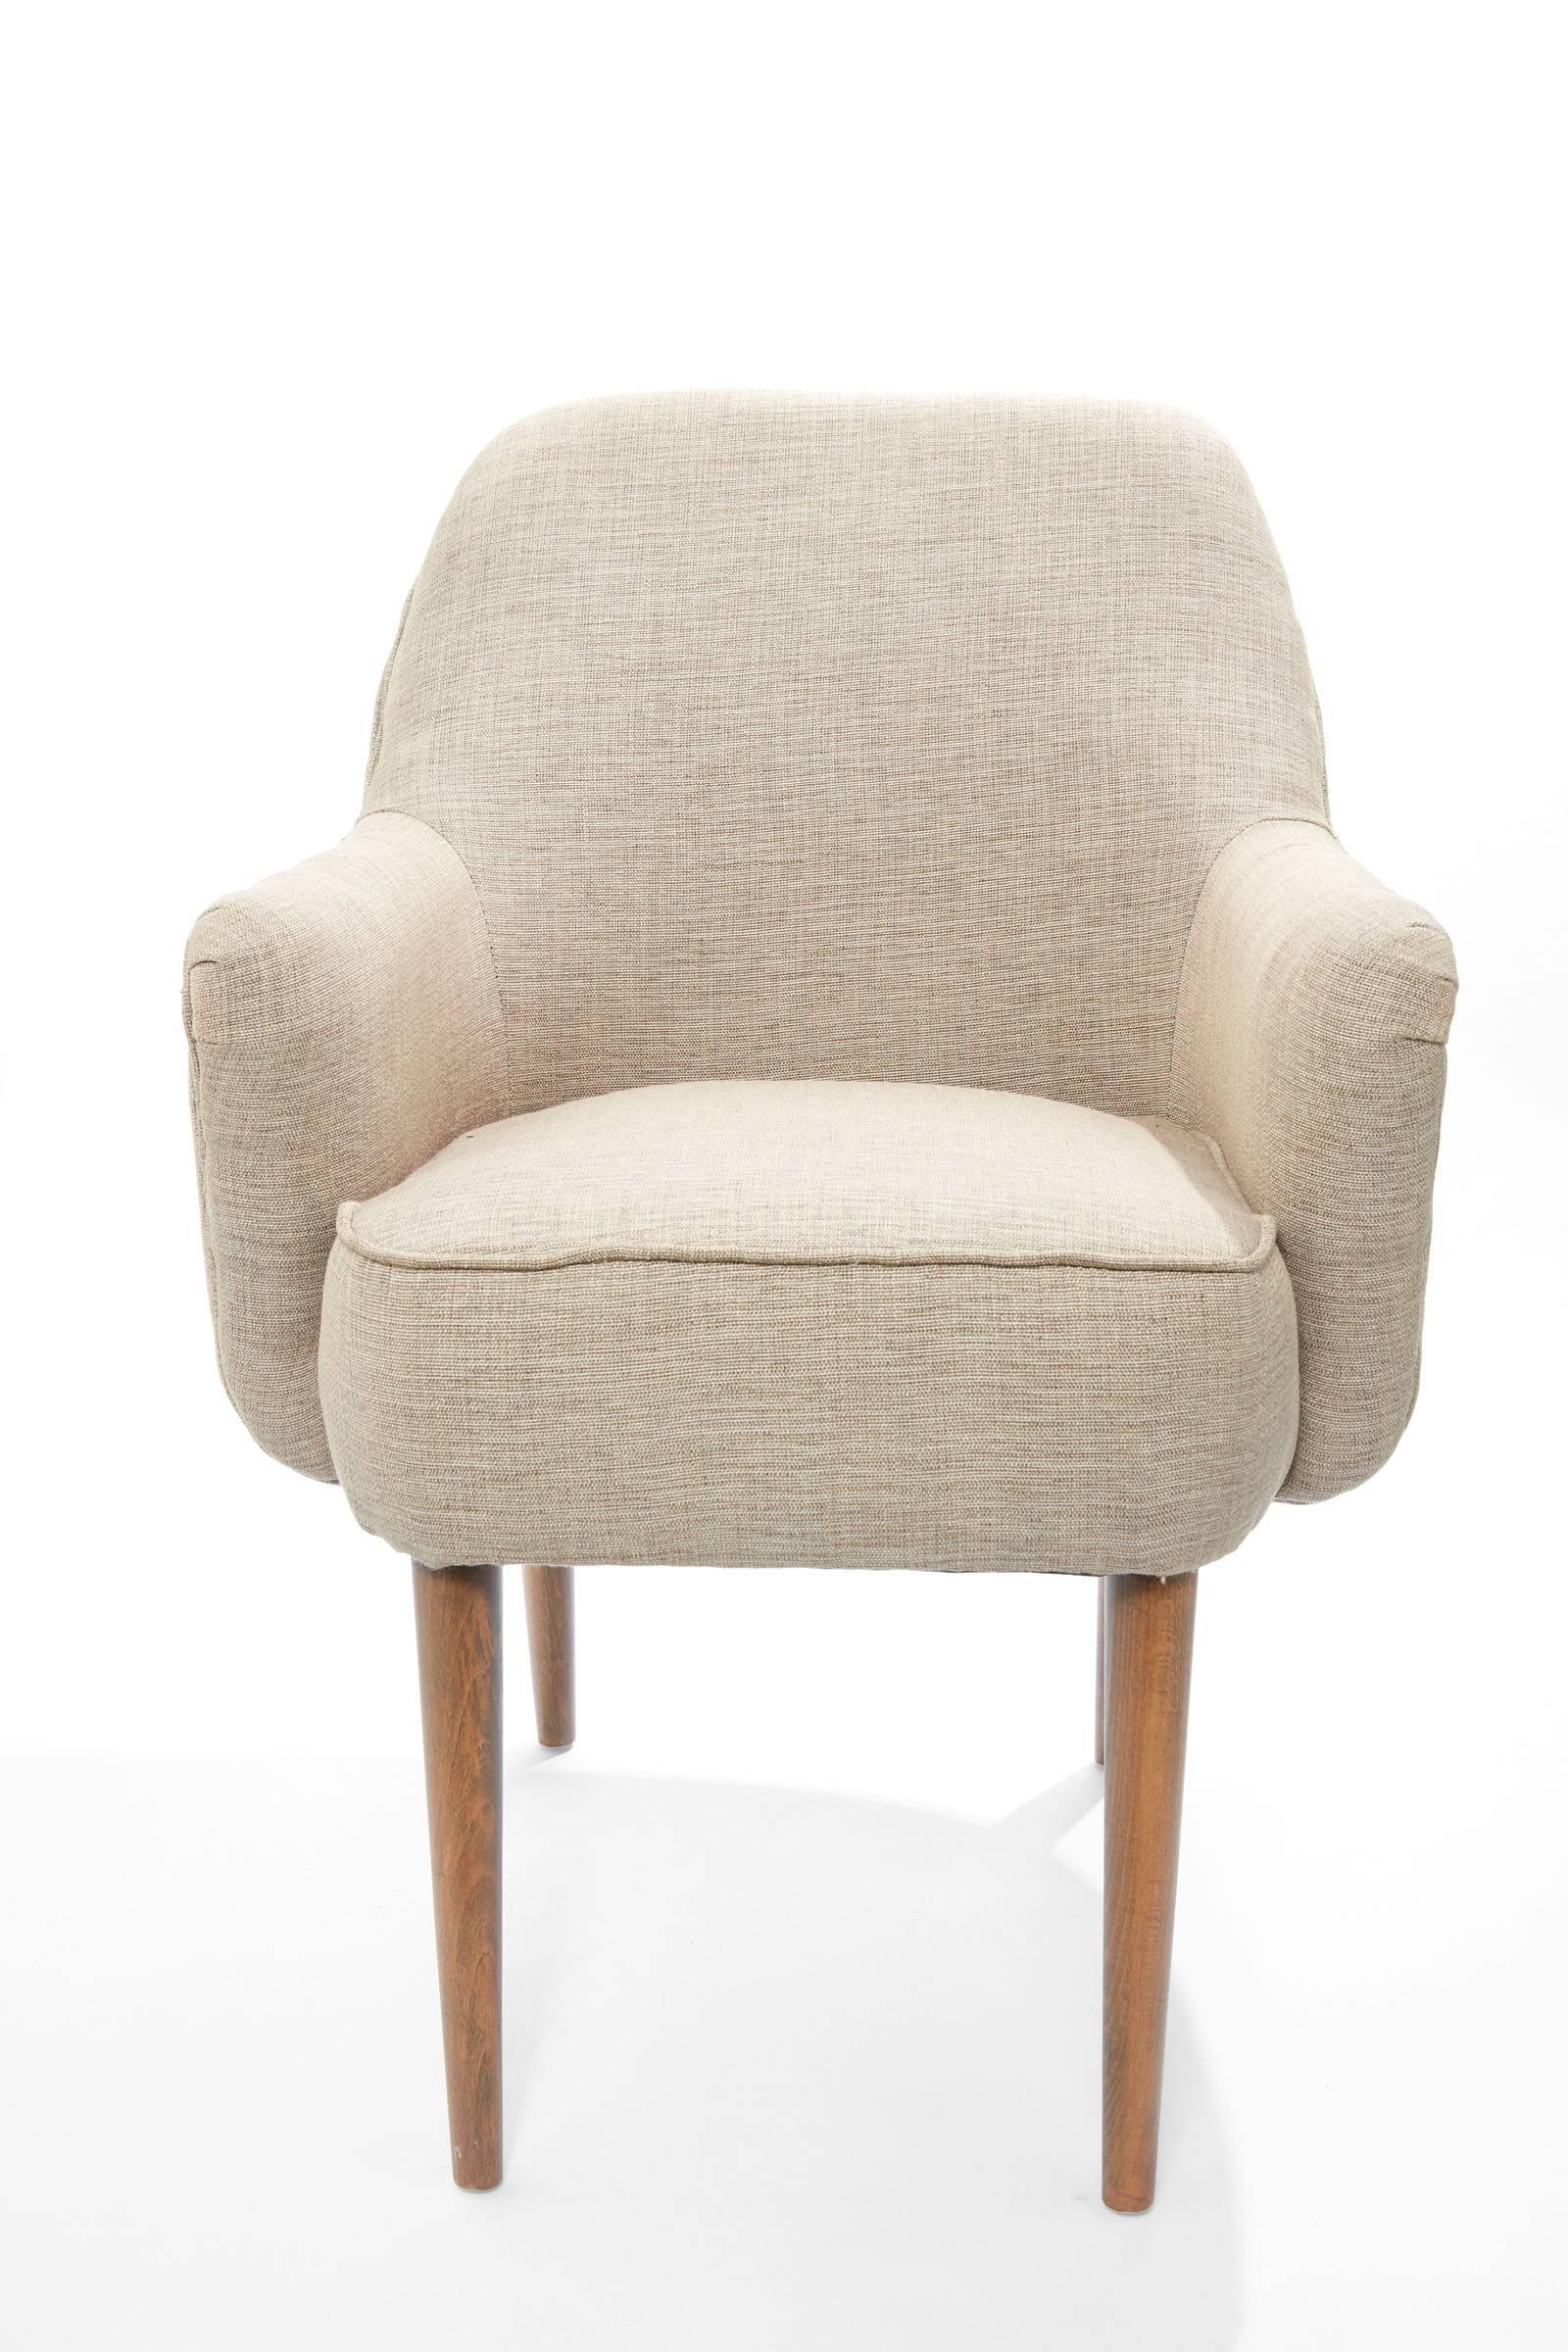 Mid-20th century pair of modern Danish petite upholstered armchairs



Dimensions: 34.5 in. H from top of chair to floor; 23 in. deep from front of chair to back of chair; 24 in. W from arm to arm.
 Seat of chair is 17.5 in Wide x 17.5 in D and seat